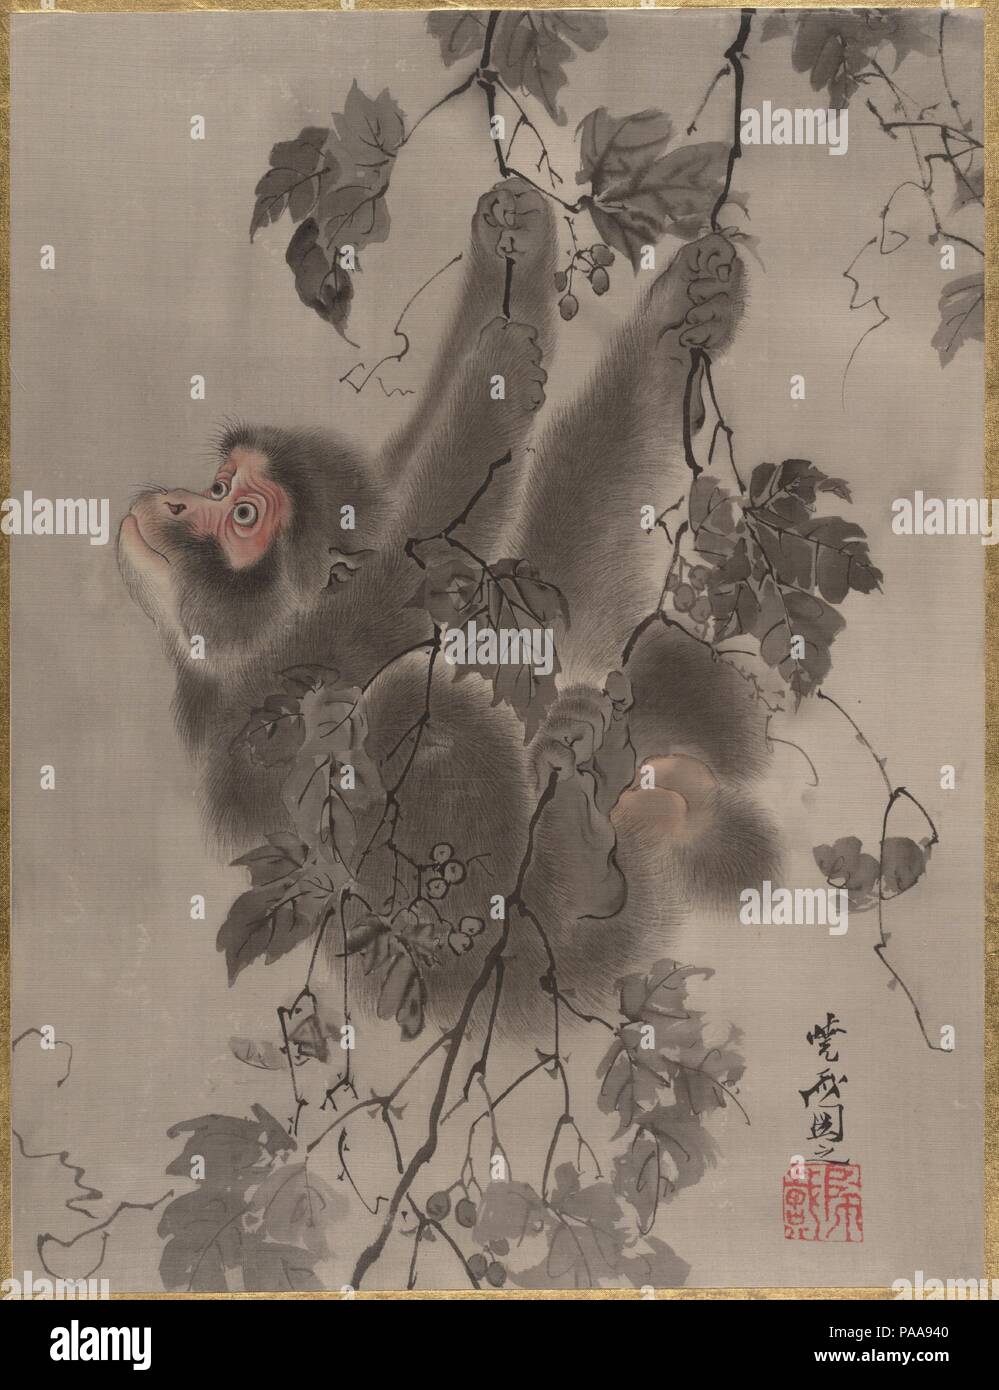 Monkey Hanging from Grapevines. Artist: Kawanabe Kyosai (Japanese, 1831-1889). Culture: Japan. Dimensions: 14 1/8 x 10 3/4 in. (35.9 x 27.3 cm). Date: ca. 1887. Museum: Metropolitan Museum of Art, New York, USA. Stock Photo